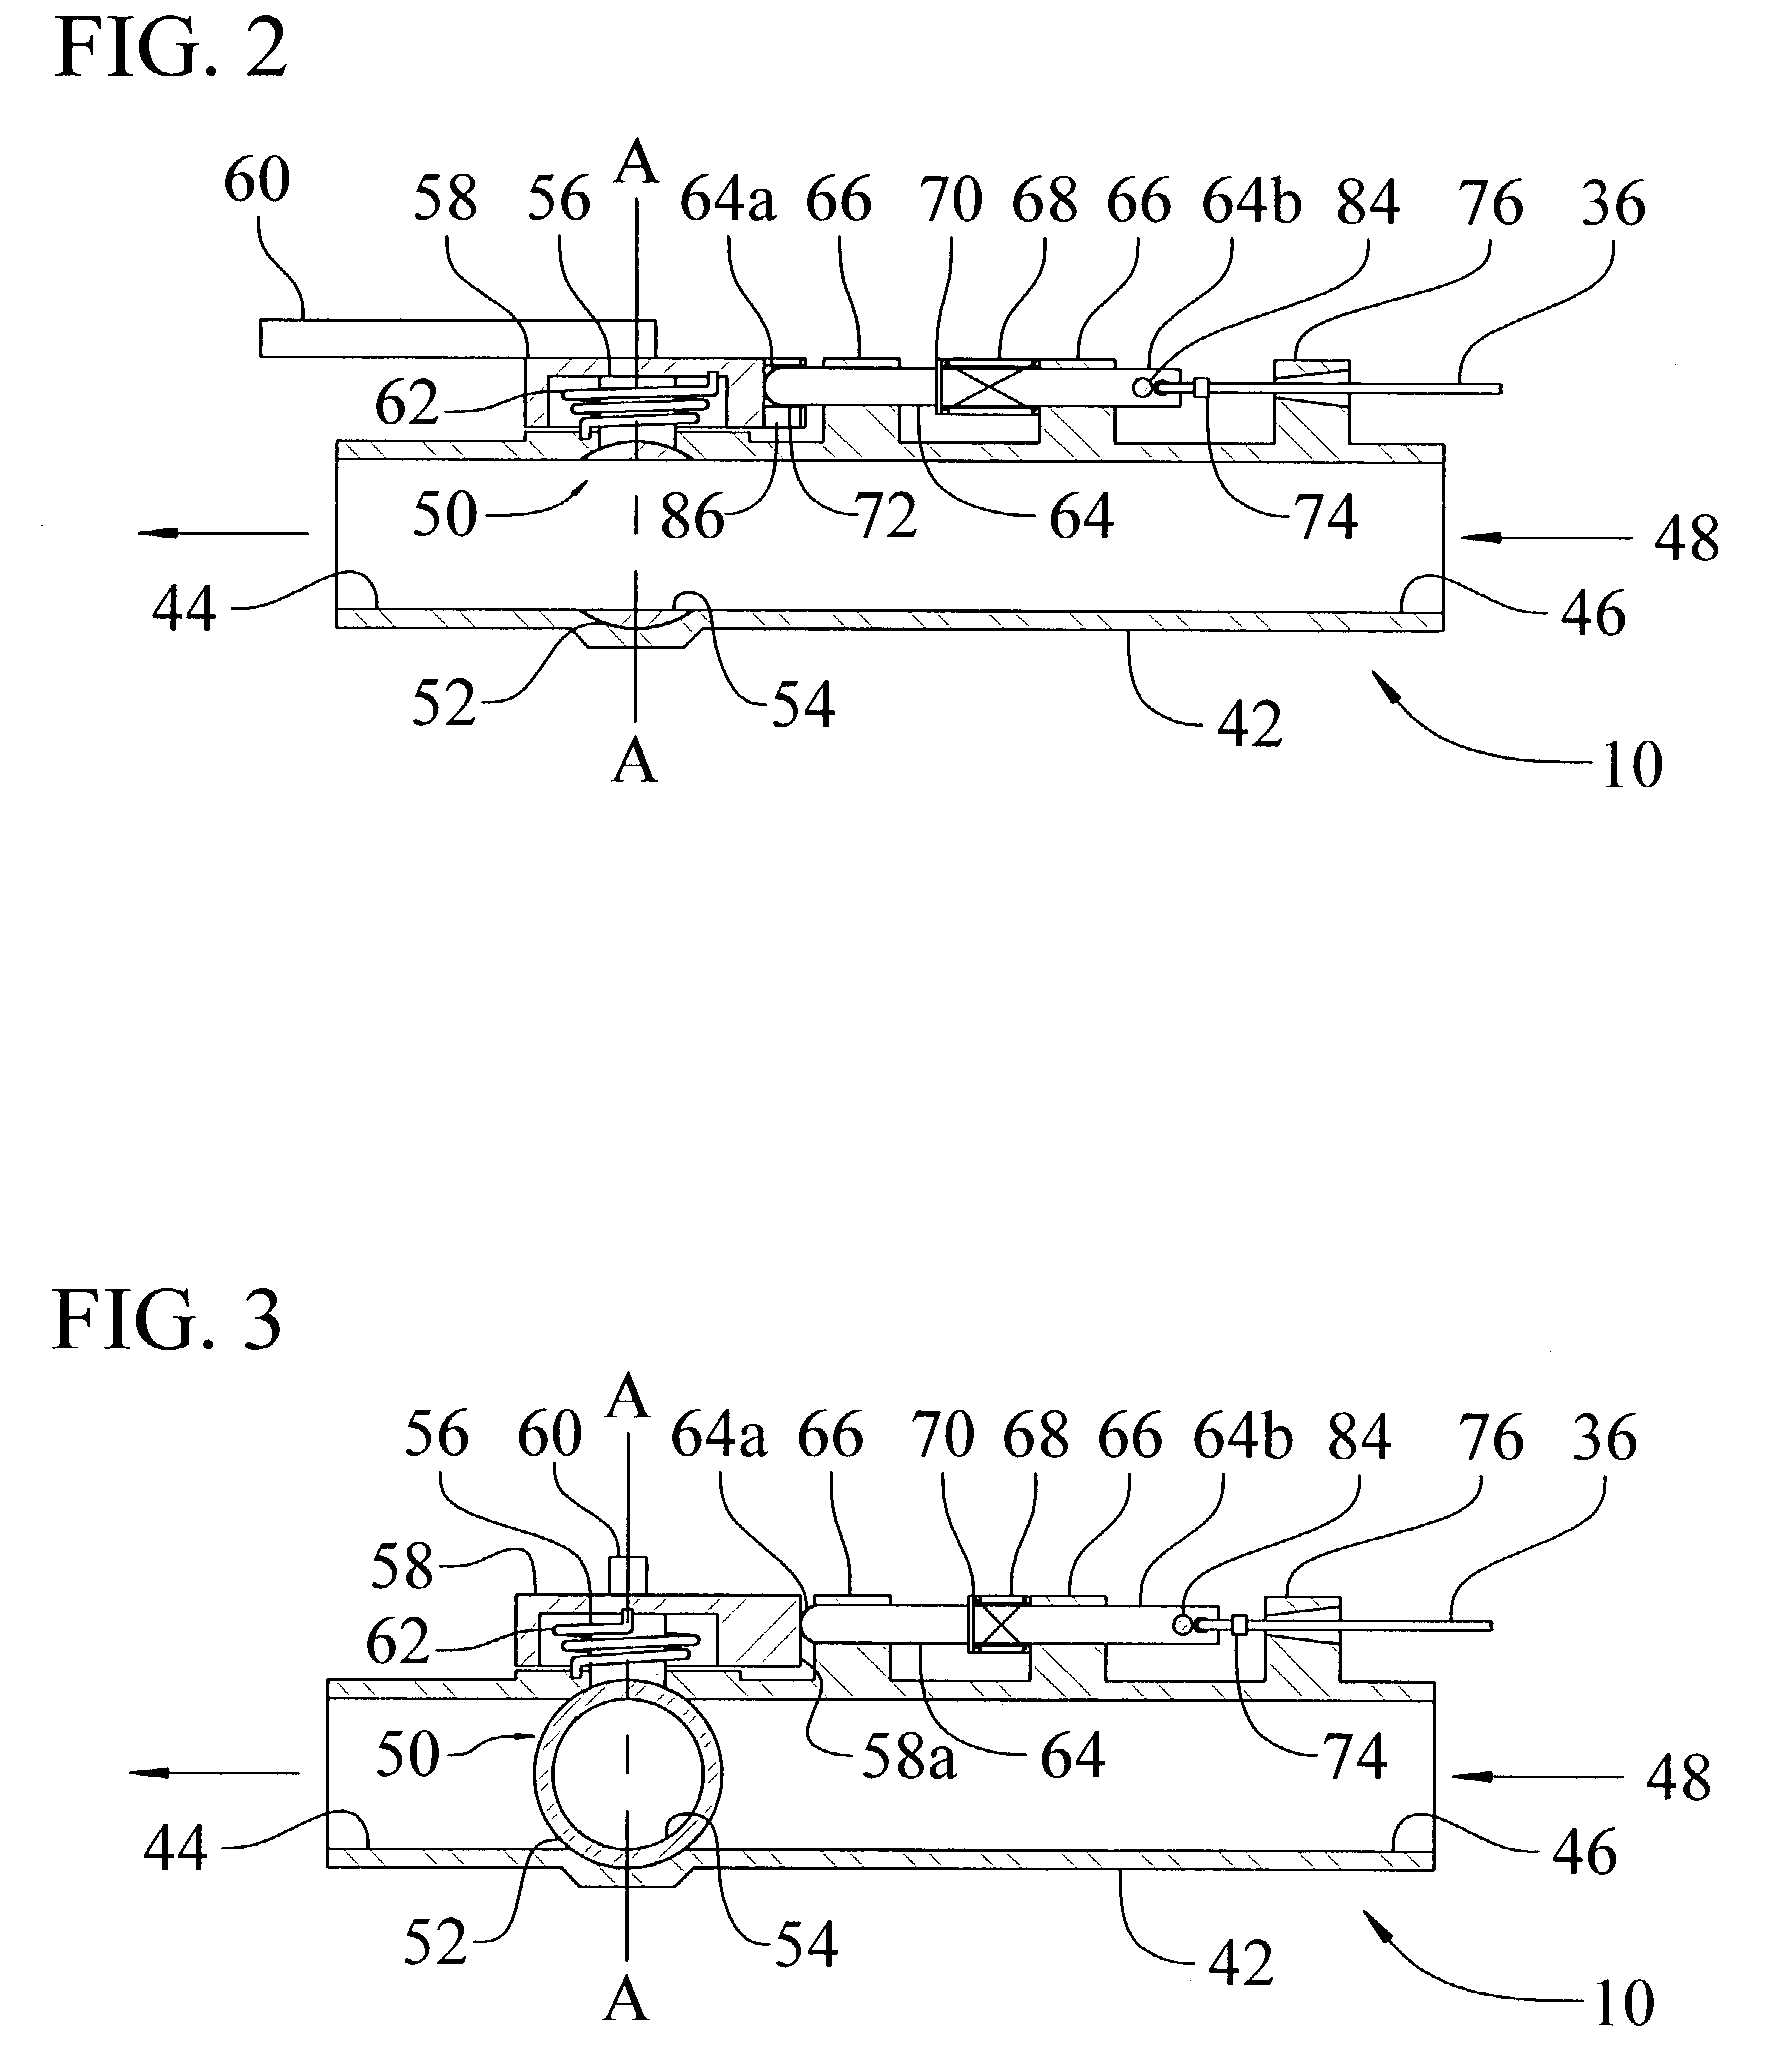 Safety system for mobile anhydrous ammonia fertilizer system